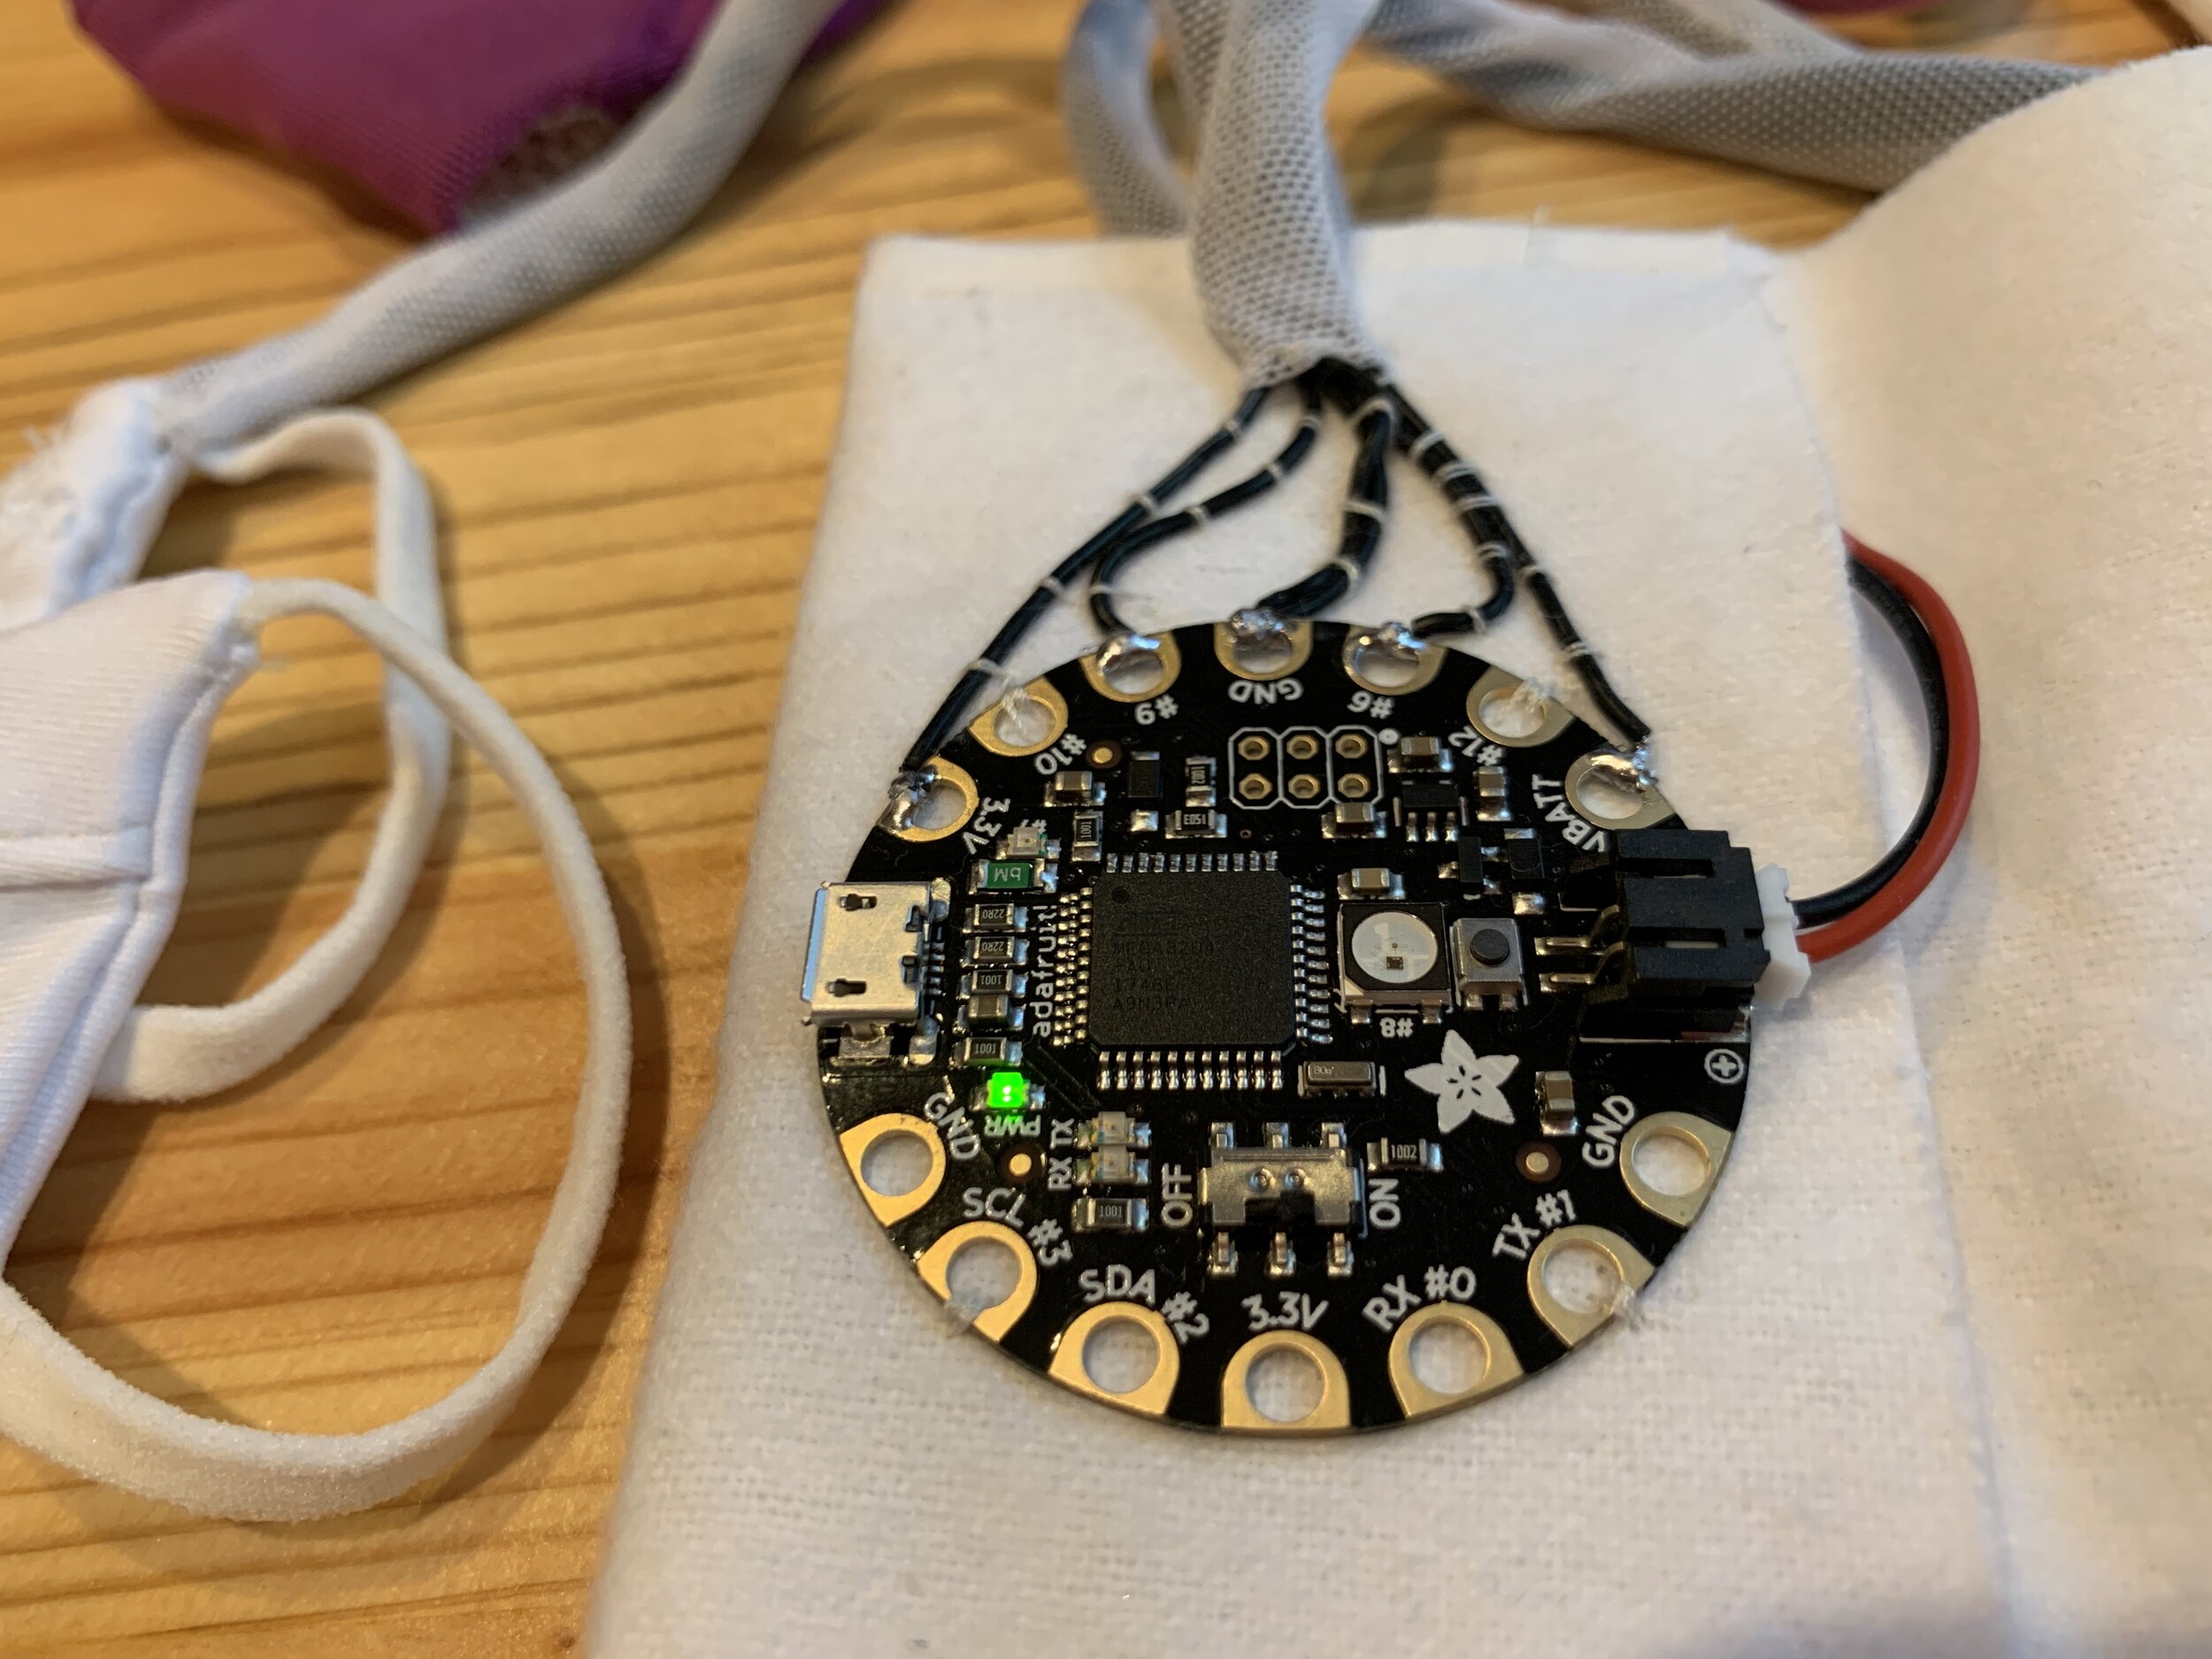 The Adafruit Flora microcontroller in its pocket, with rechargeable LiPo battery